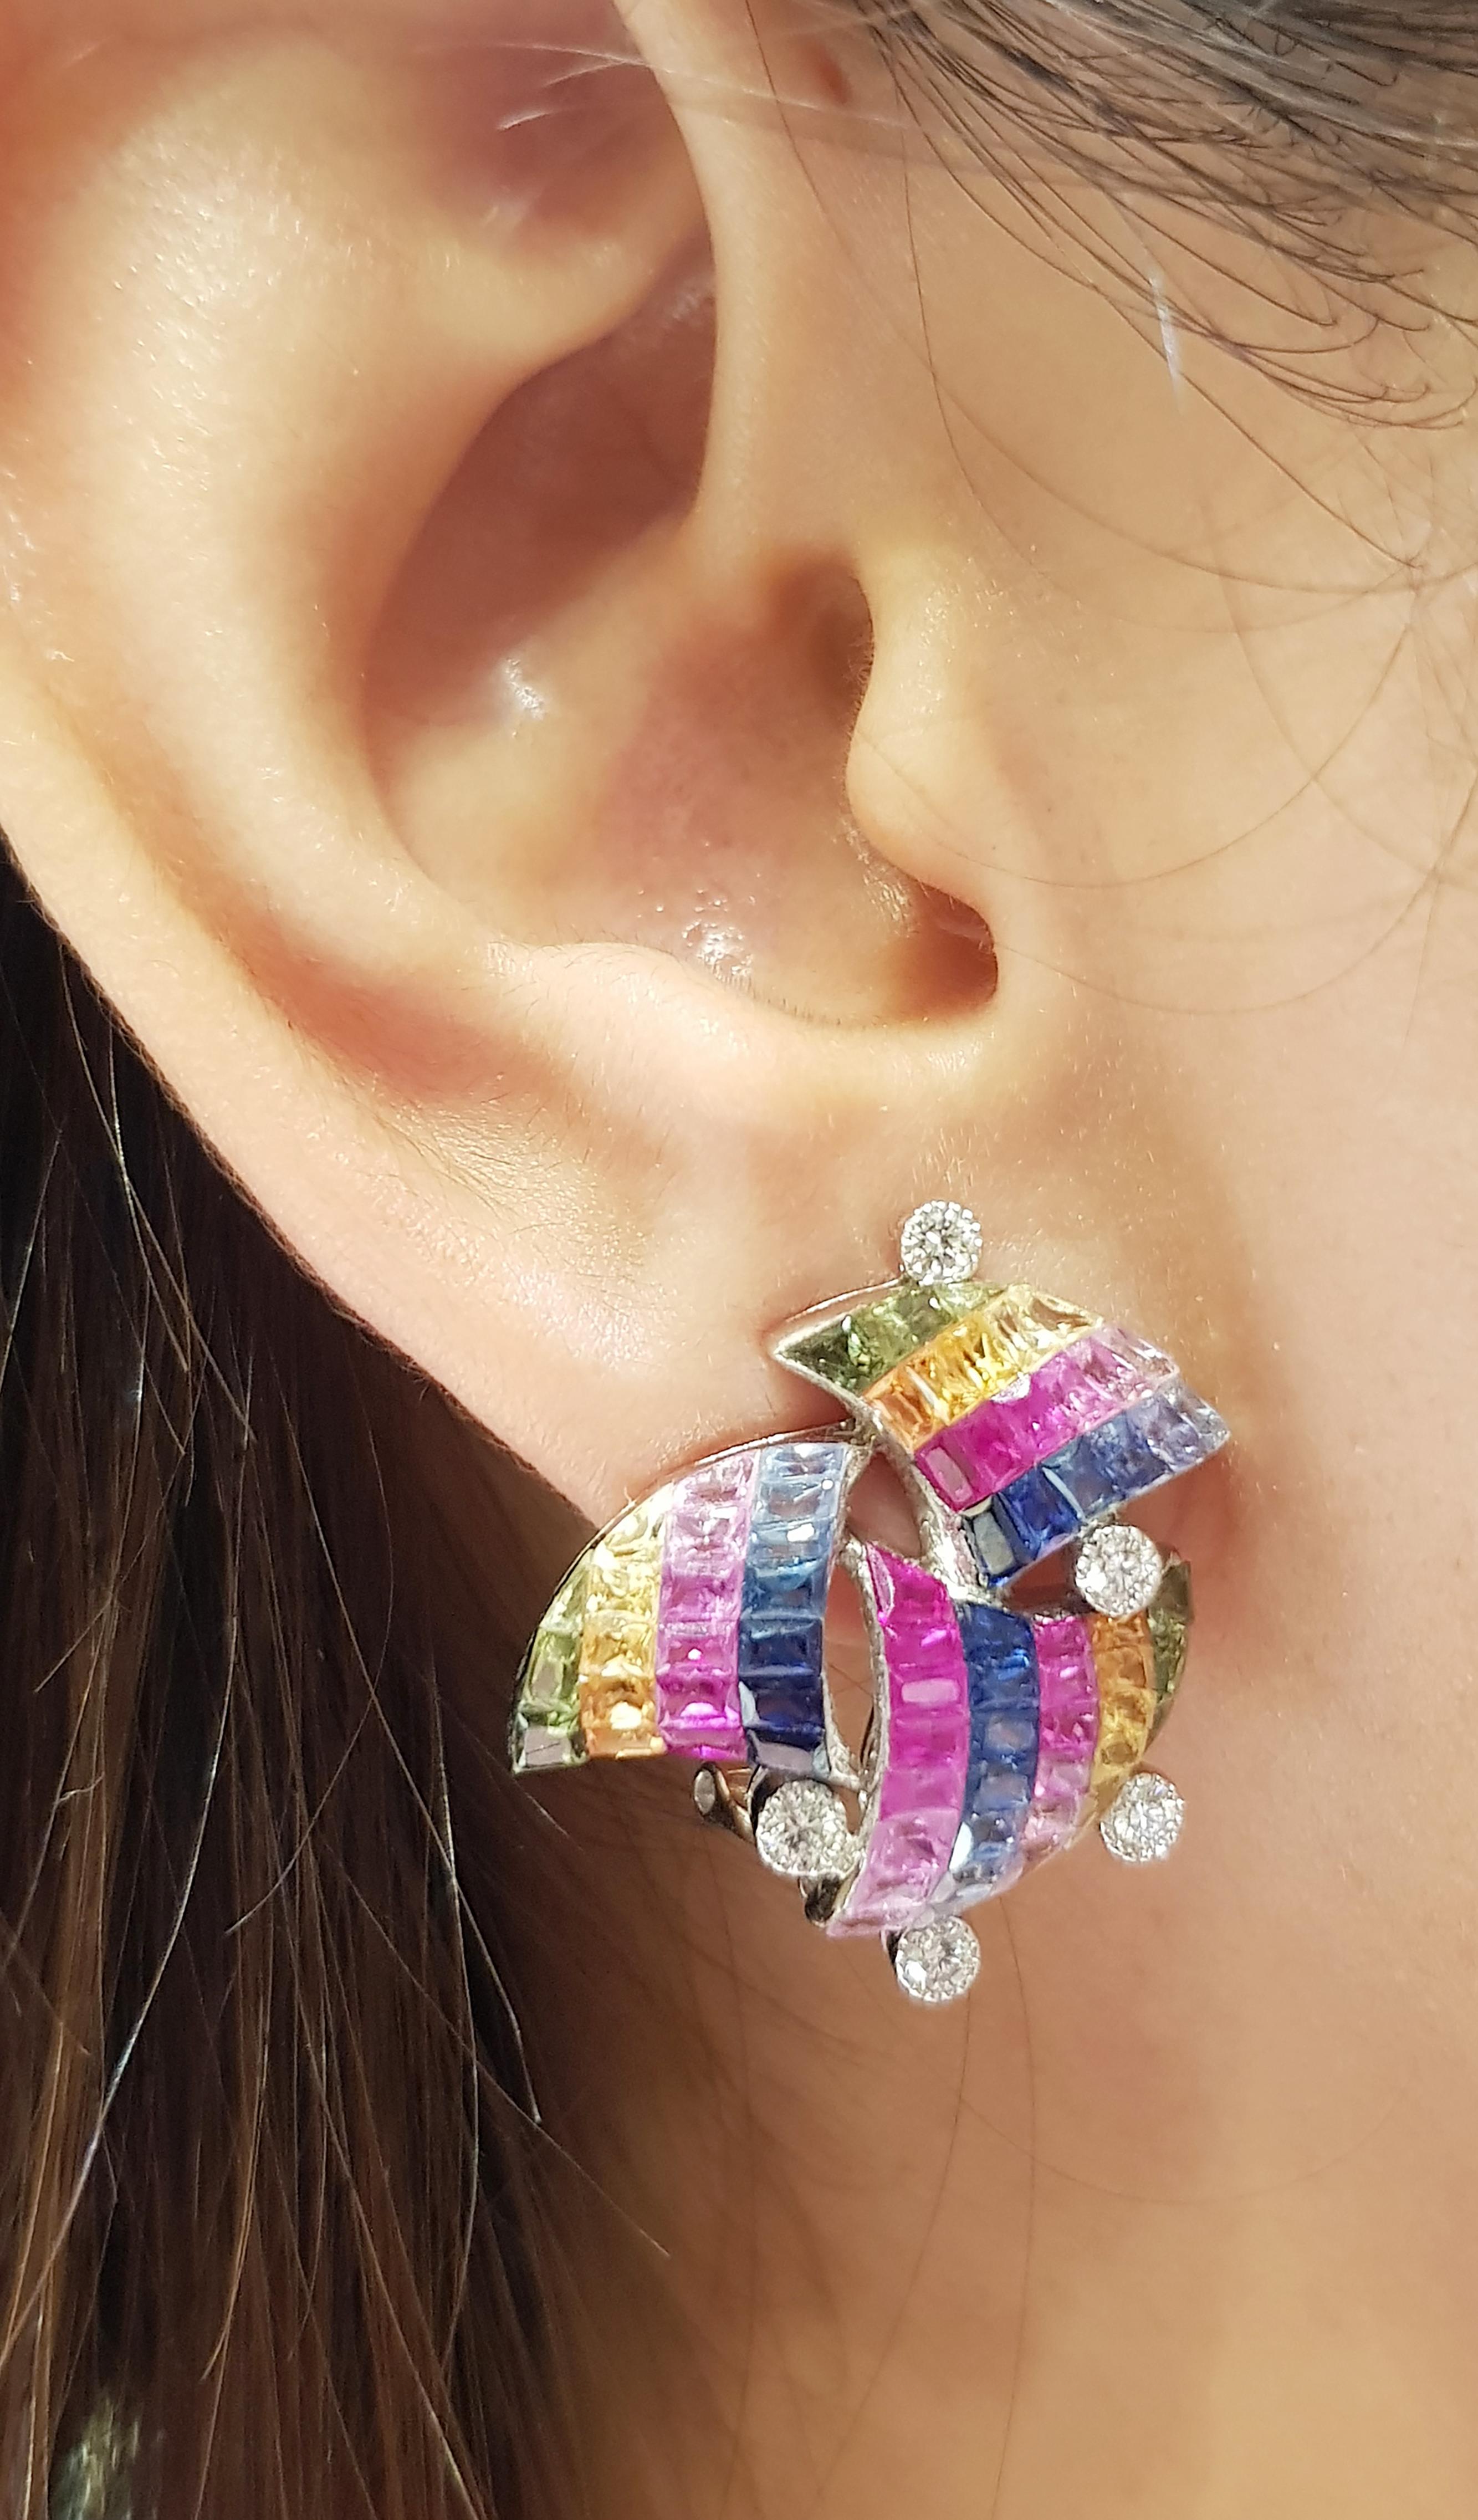 Rainbow Colour Sapphire 16.85 carats with Diamond 0.39 carat Earrings set in 18 Karat White Gold Settings

Width:  2.5 cm 
Length: 2.6 cm
Total Weight: 14.45 grams

